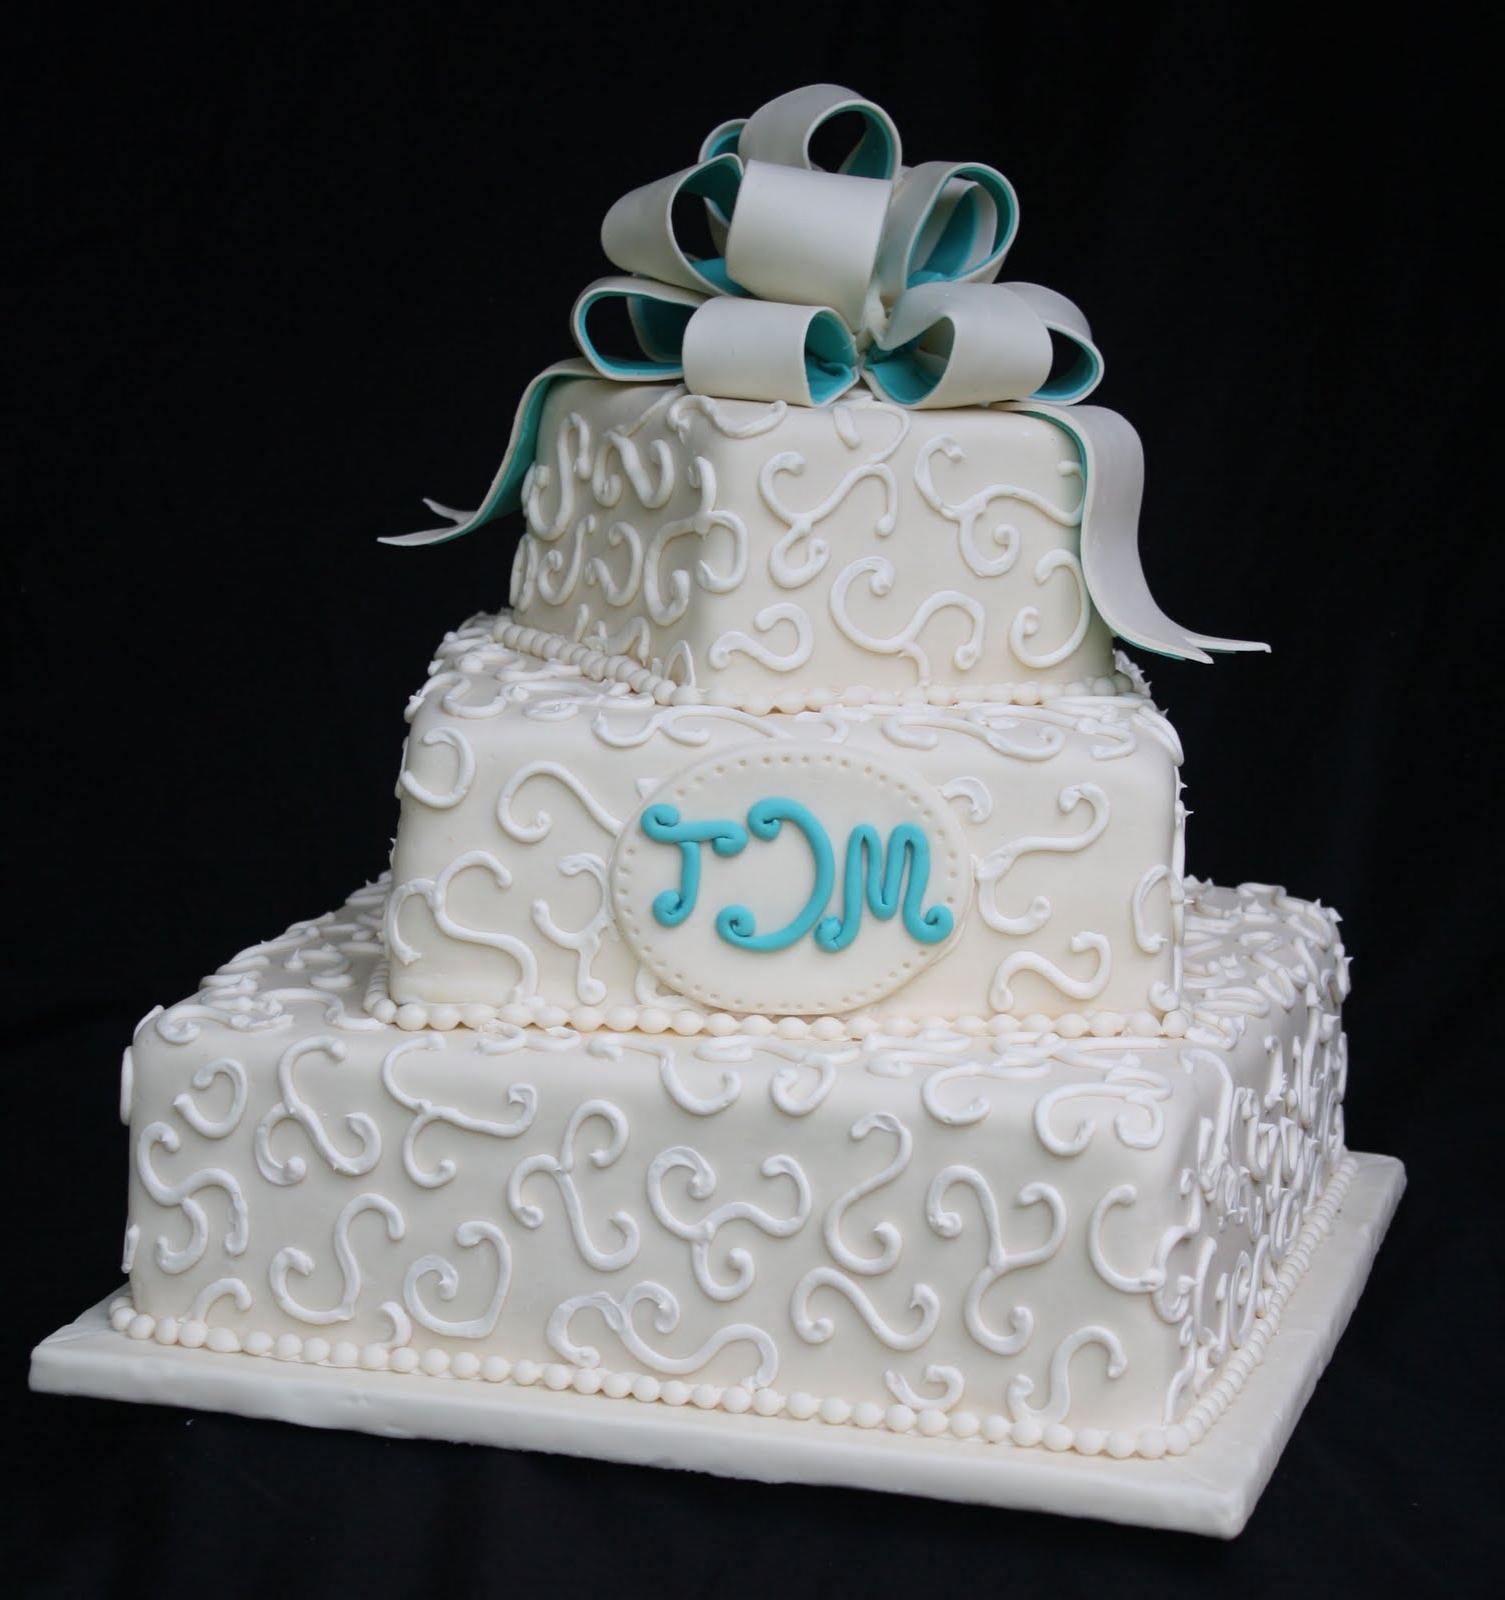 An Ivory and Teal Wedding Cake